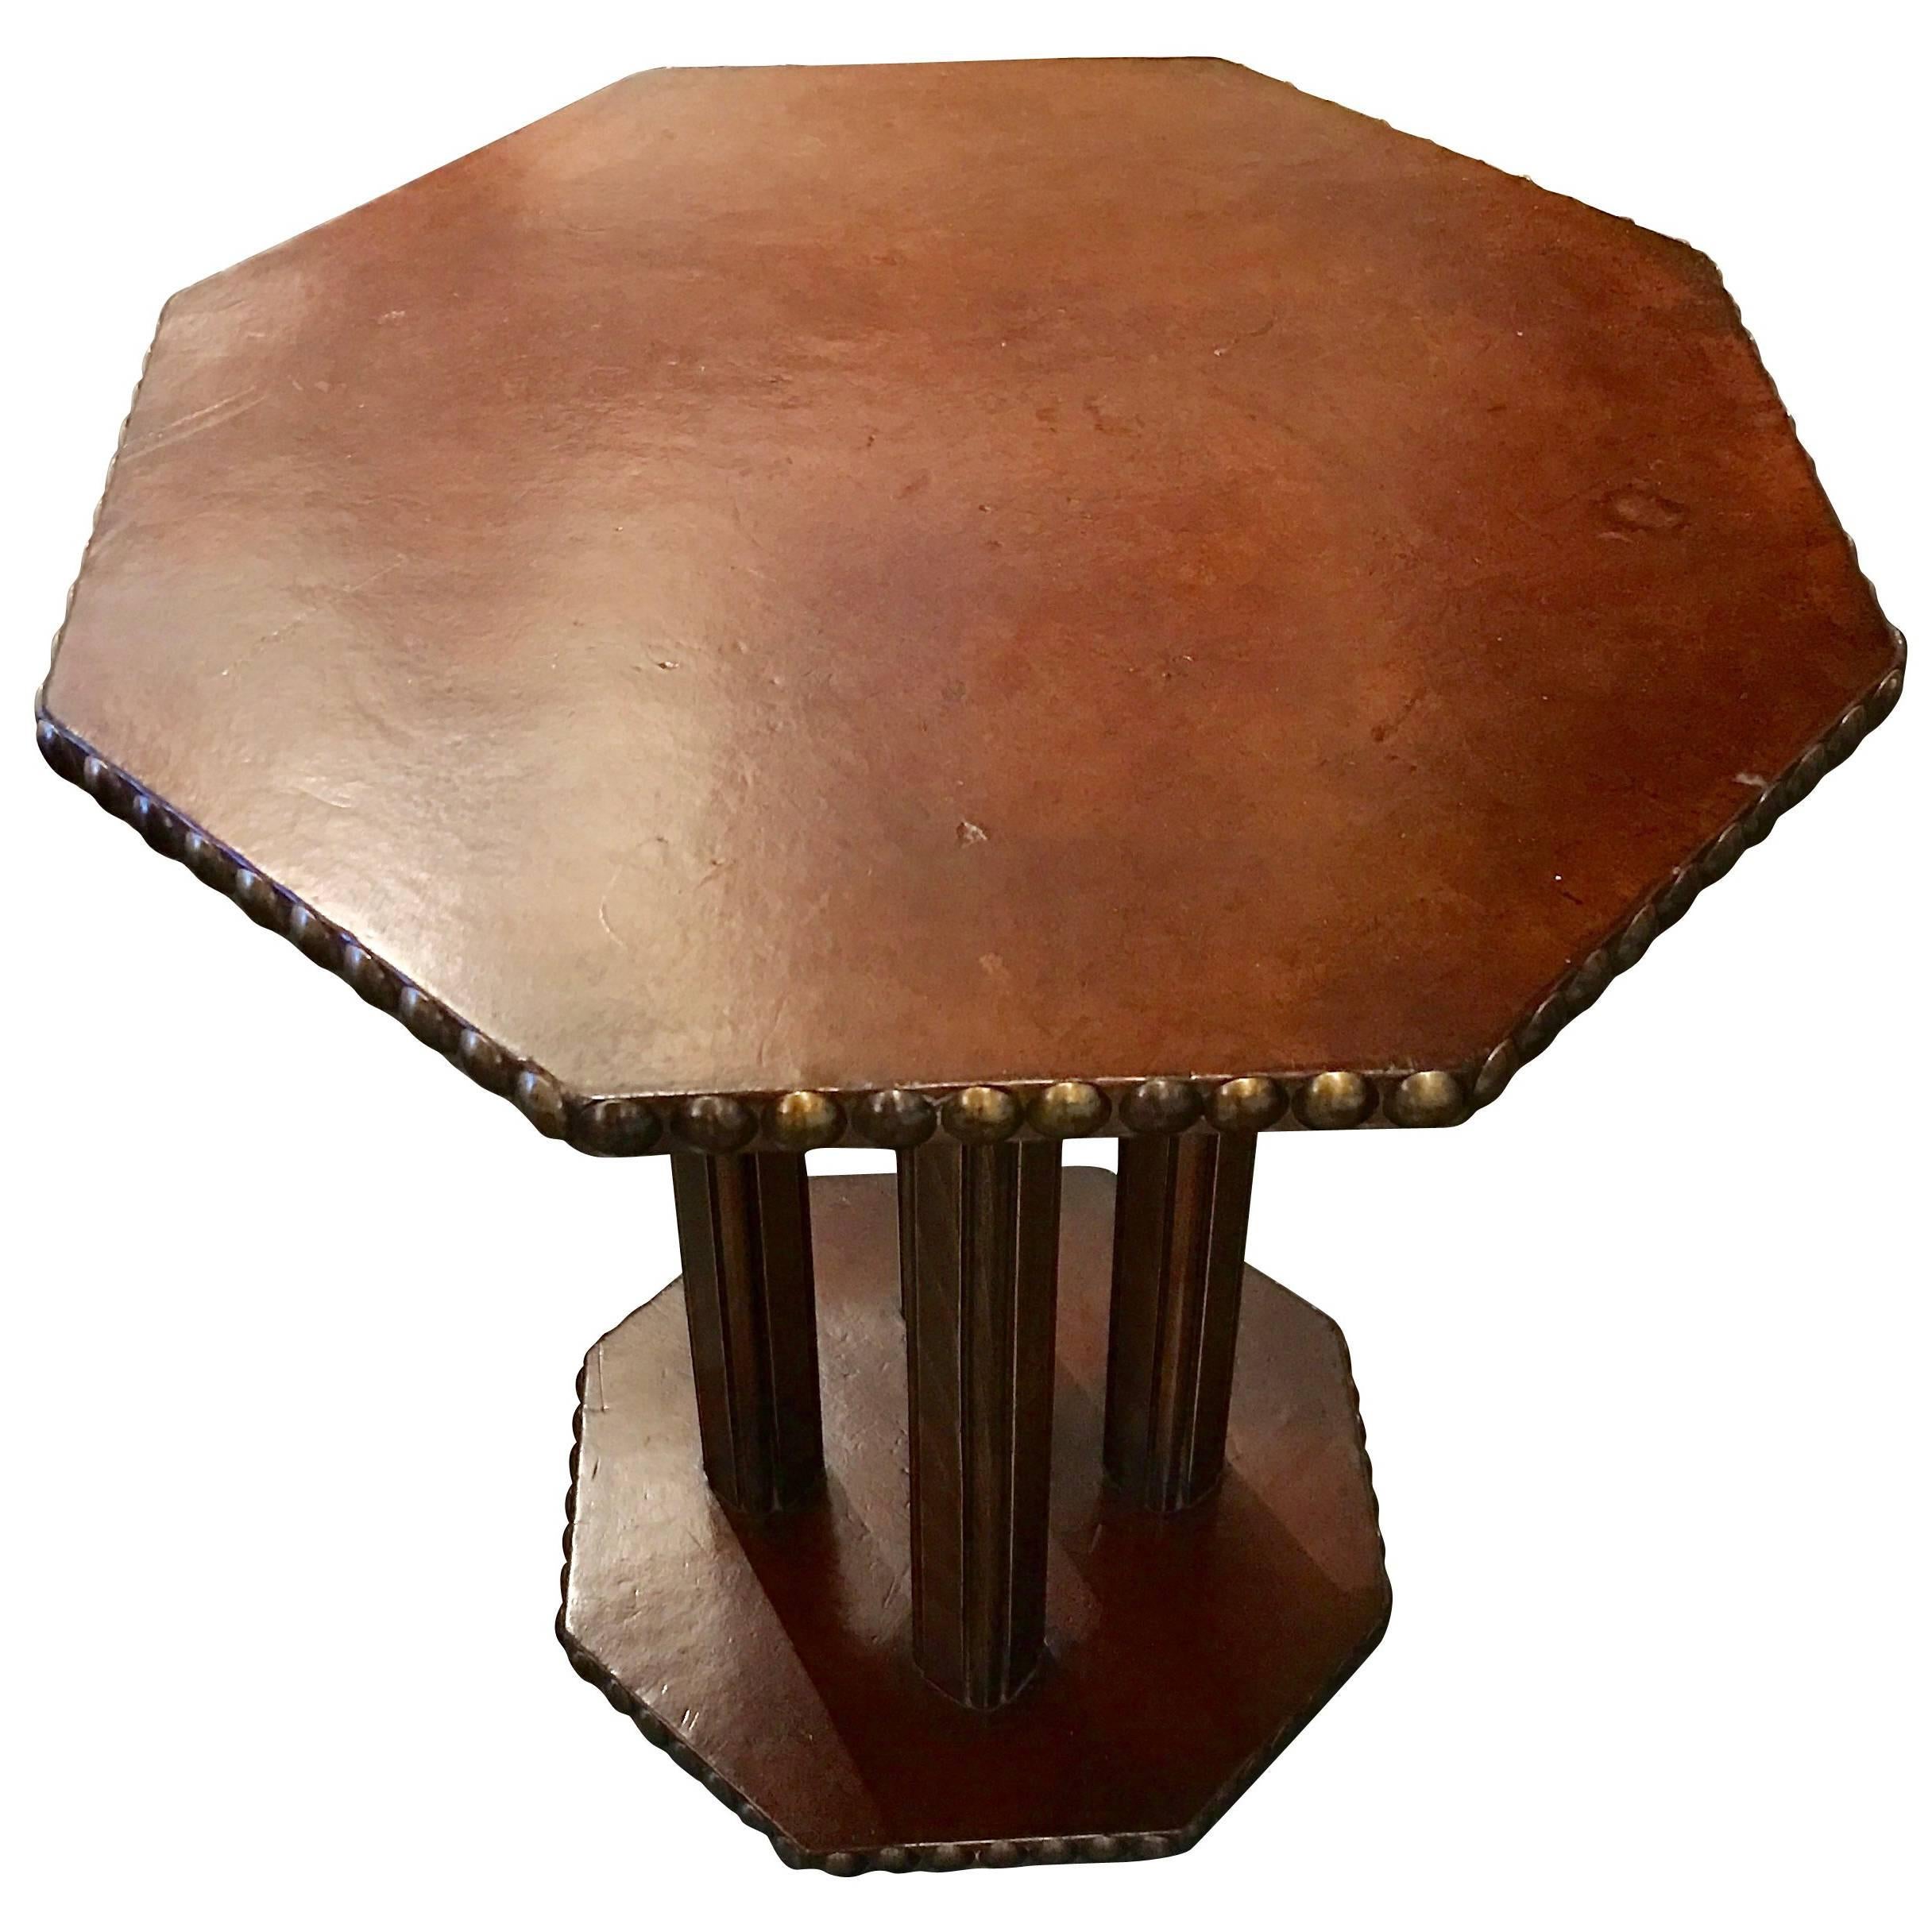 Octagonal Leather Side Table, England, 1930s